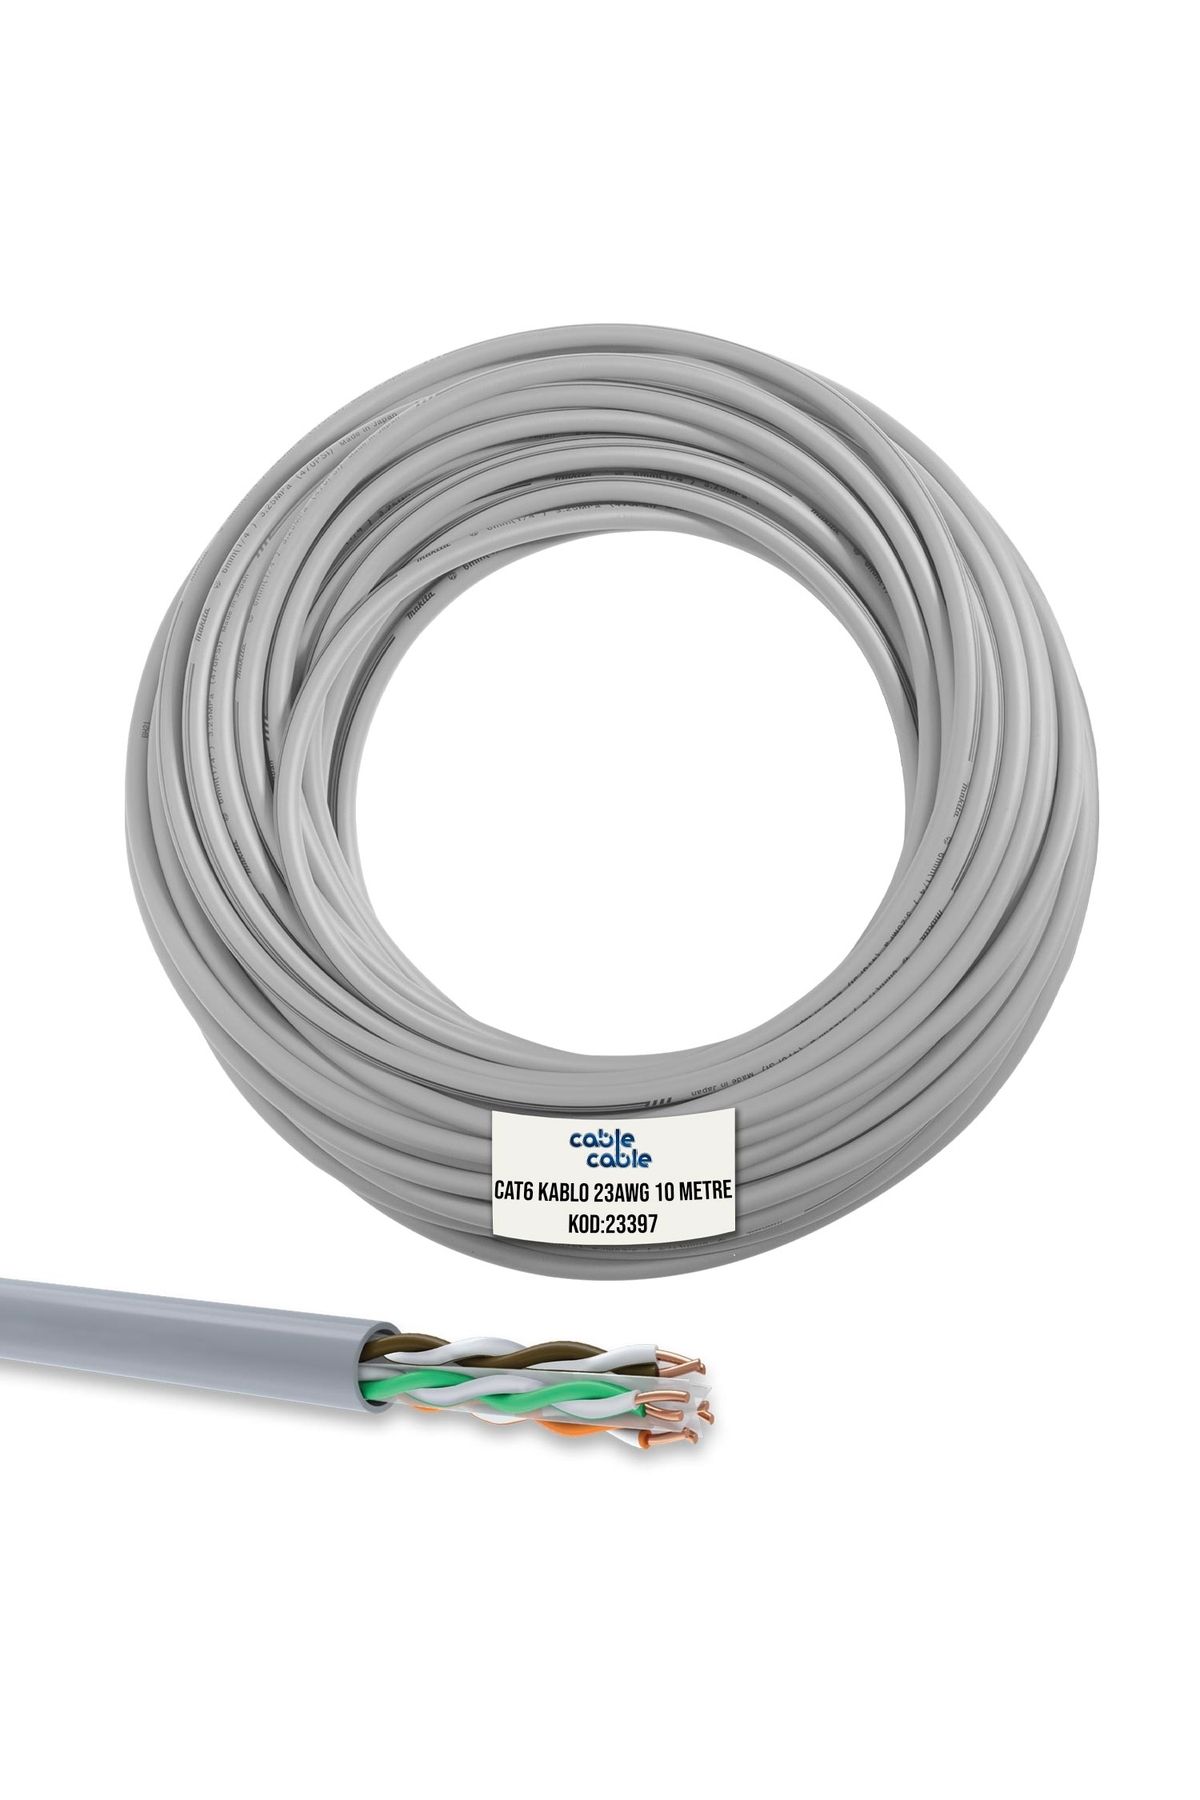 POLAXTOR Cablecable Cat6 Kablo 23awg 0.51mm 10 Metre